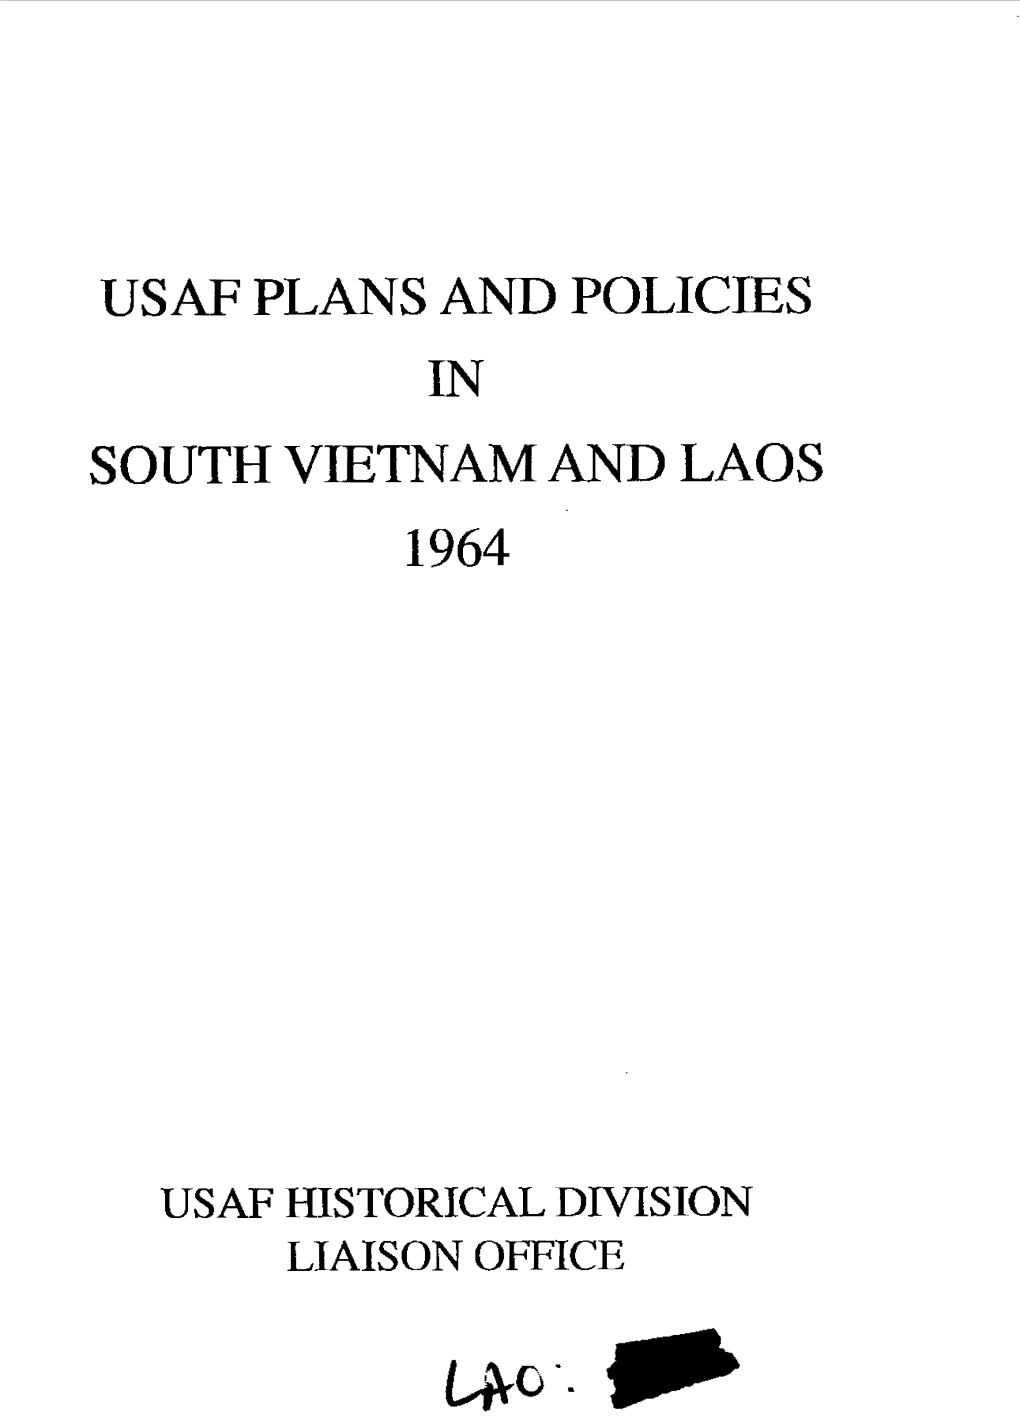 US Air Force Plans and Policies in South Vietnam and Laos, 1964